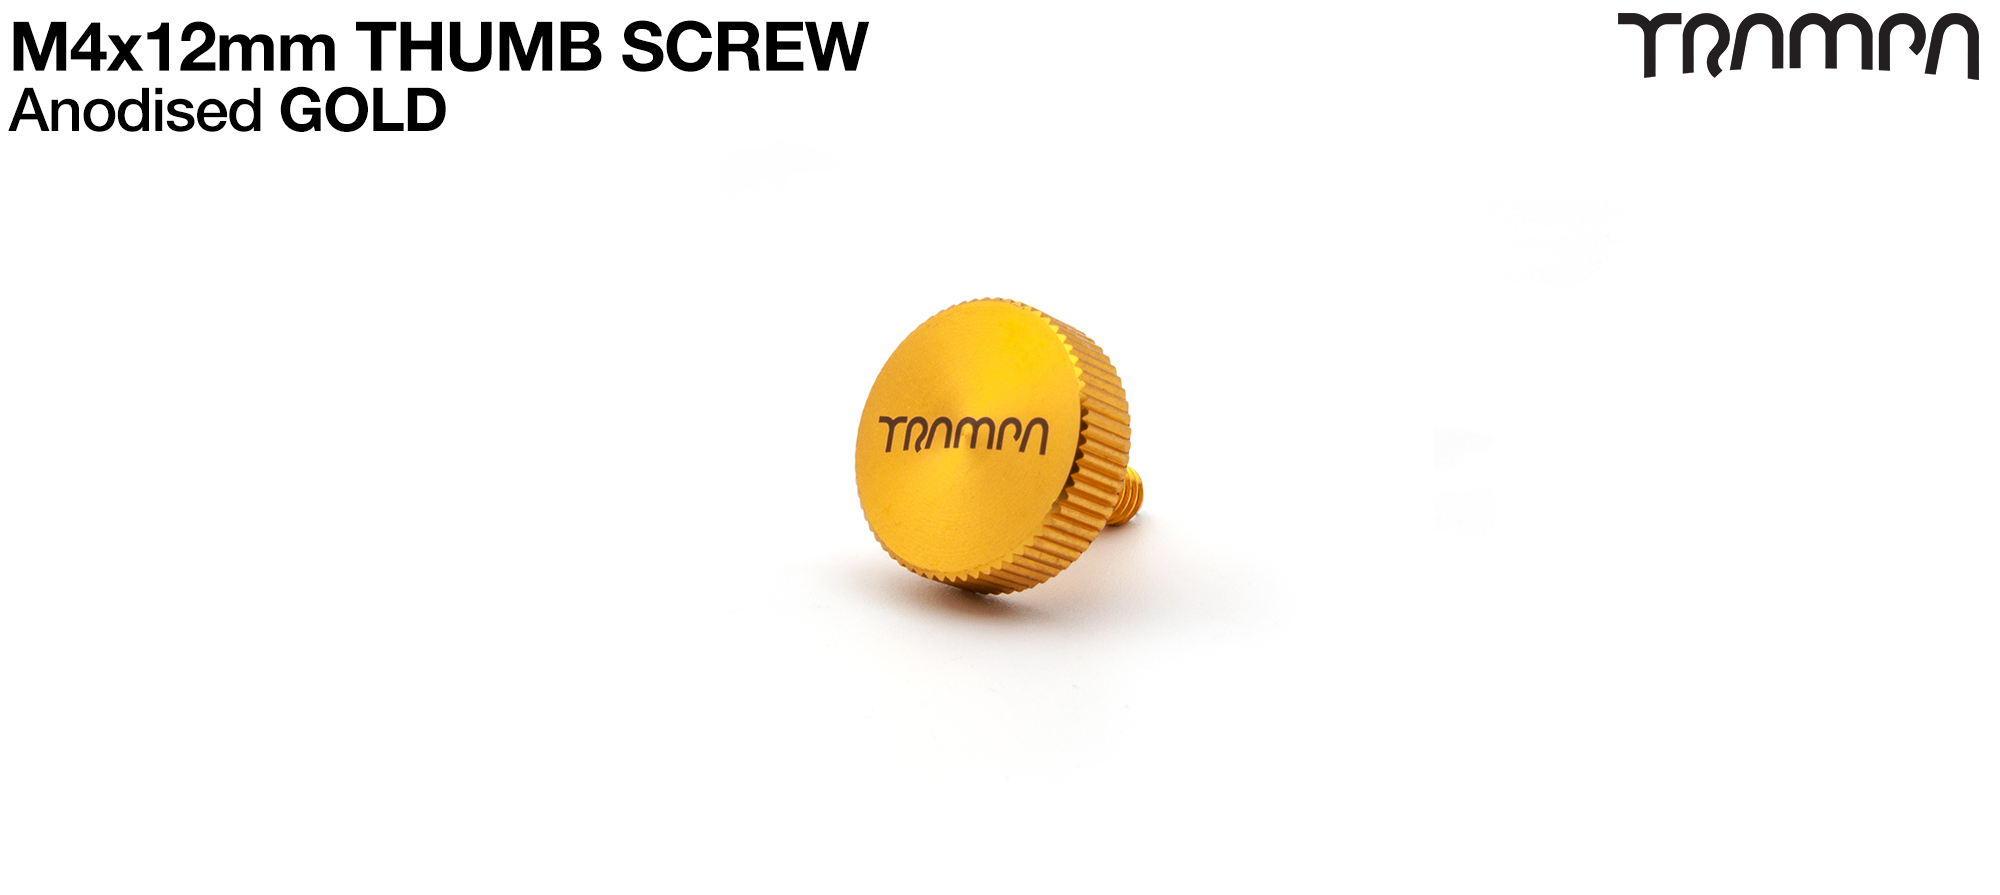 Inspection pit Thumb Screw - GOLD 